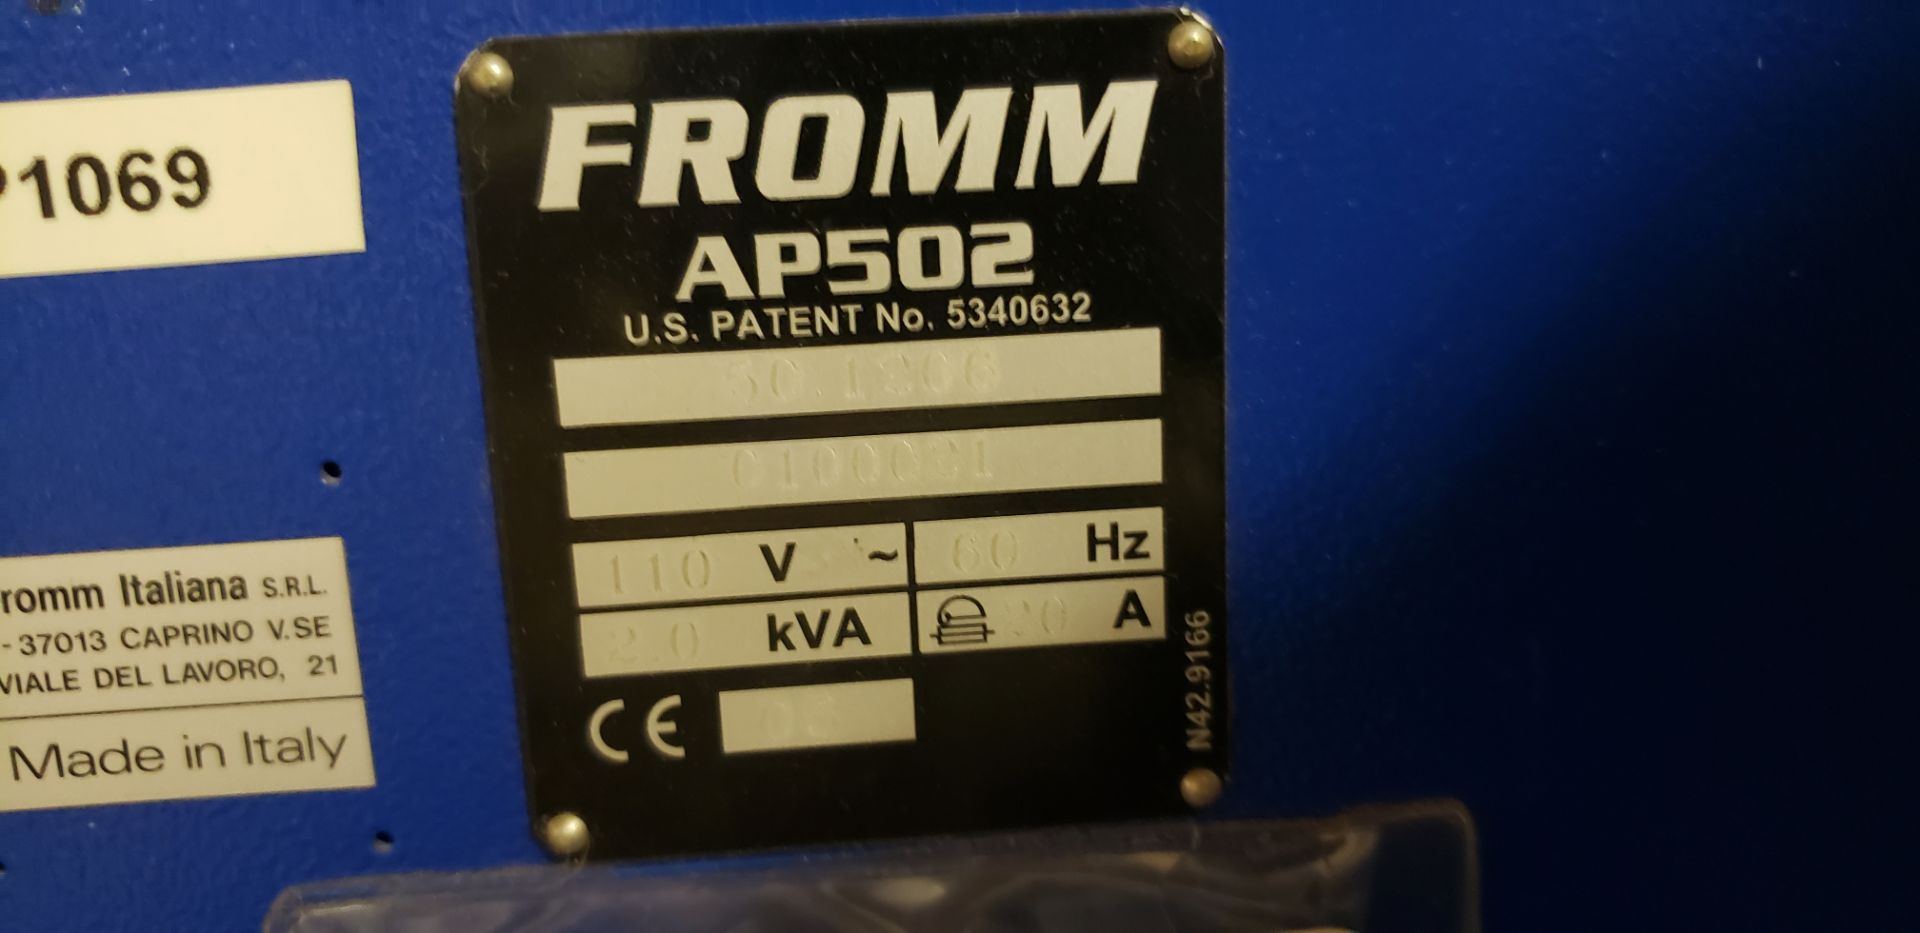 Fromm Packaging Model #AP502 Plastic Bubble Pouch Machine - Image 3 of 3